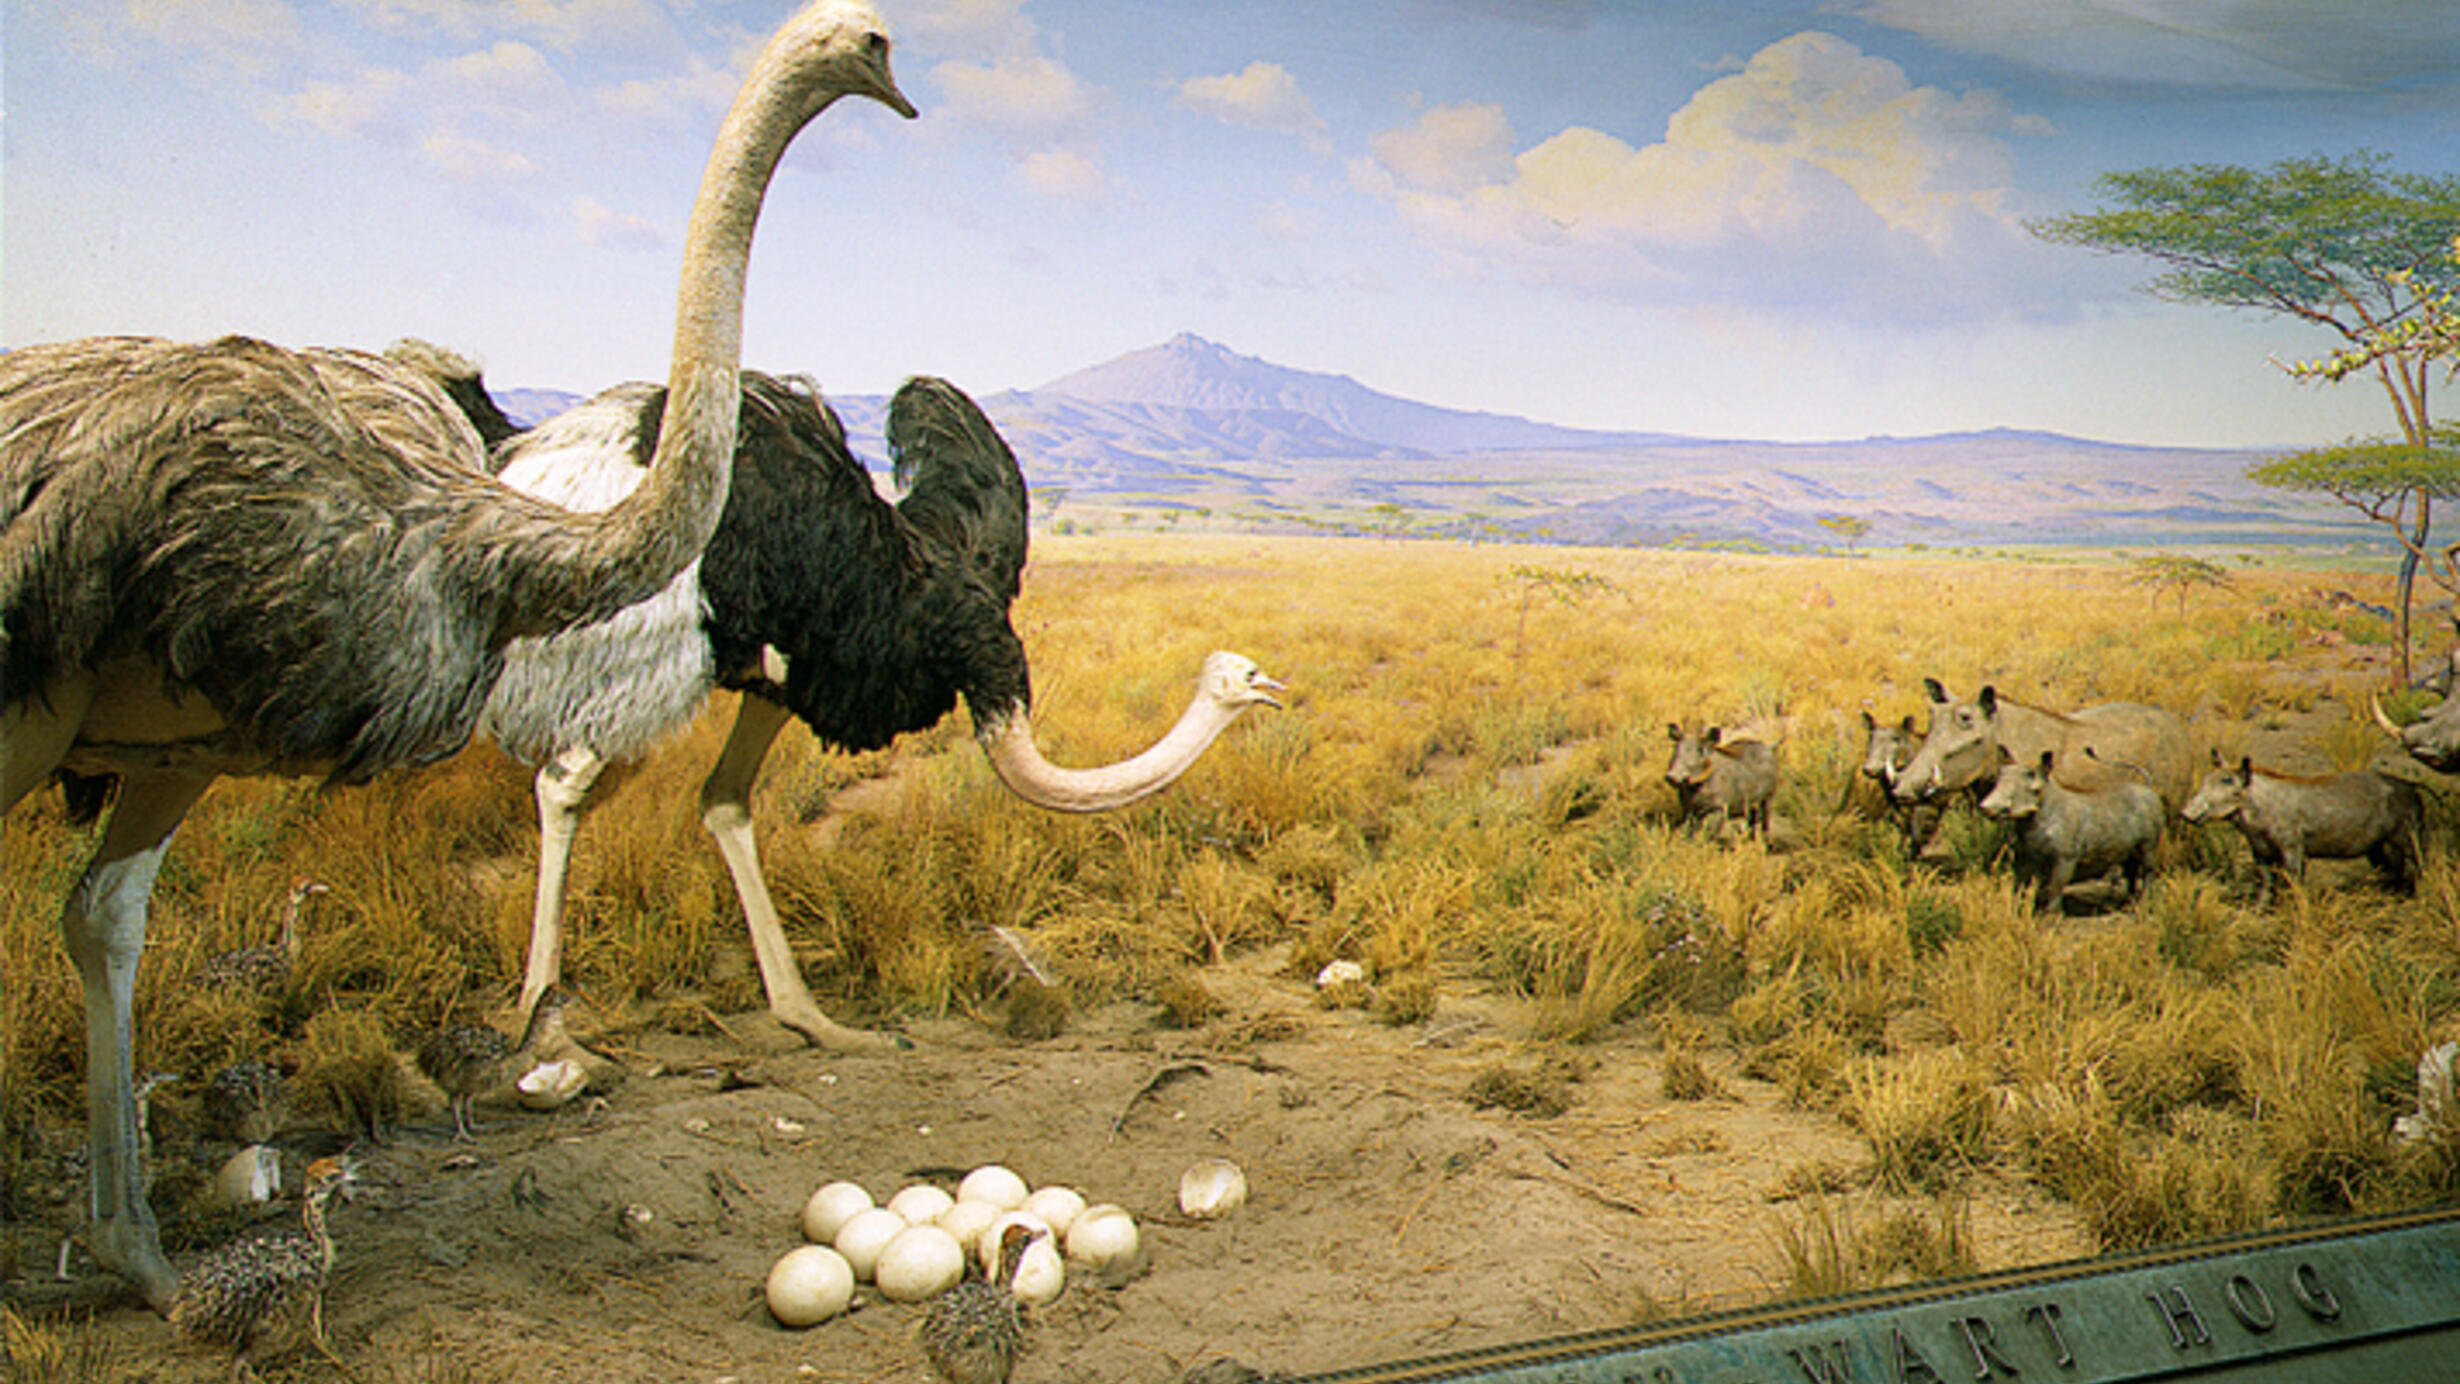 The diorama shows two ostriches with several chicks and a clutch of eggs on dry soil facing a group of wild boars.